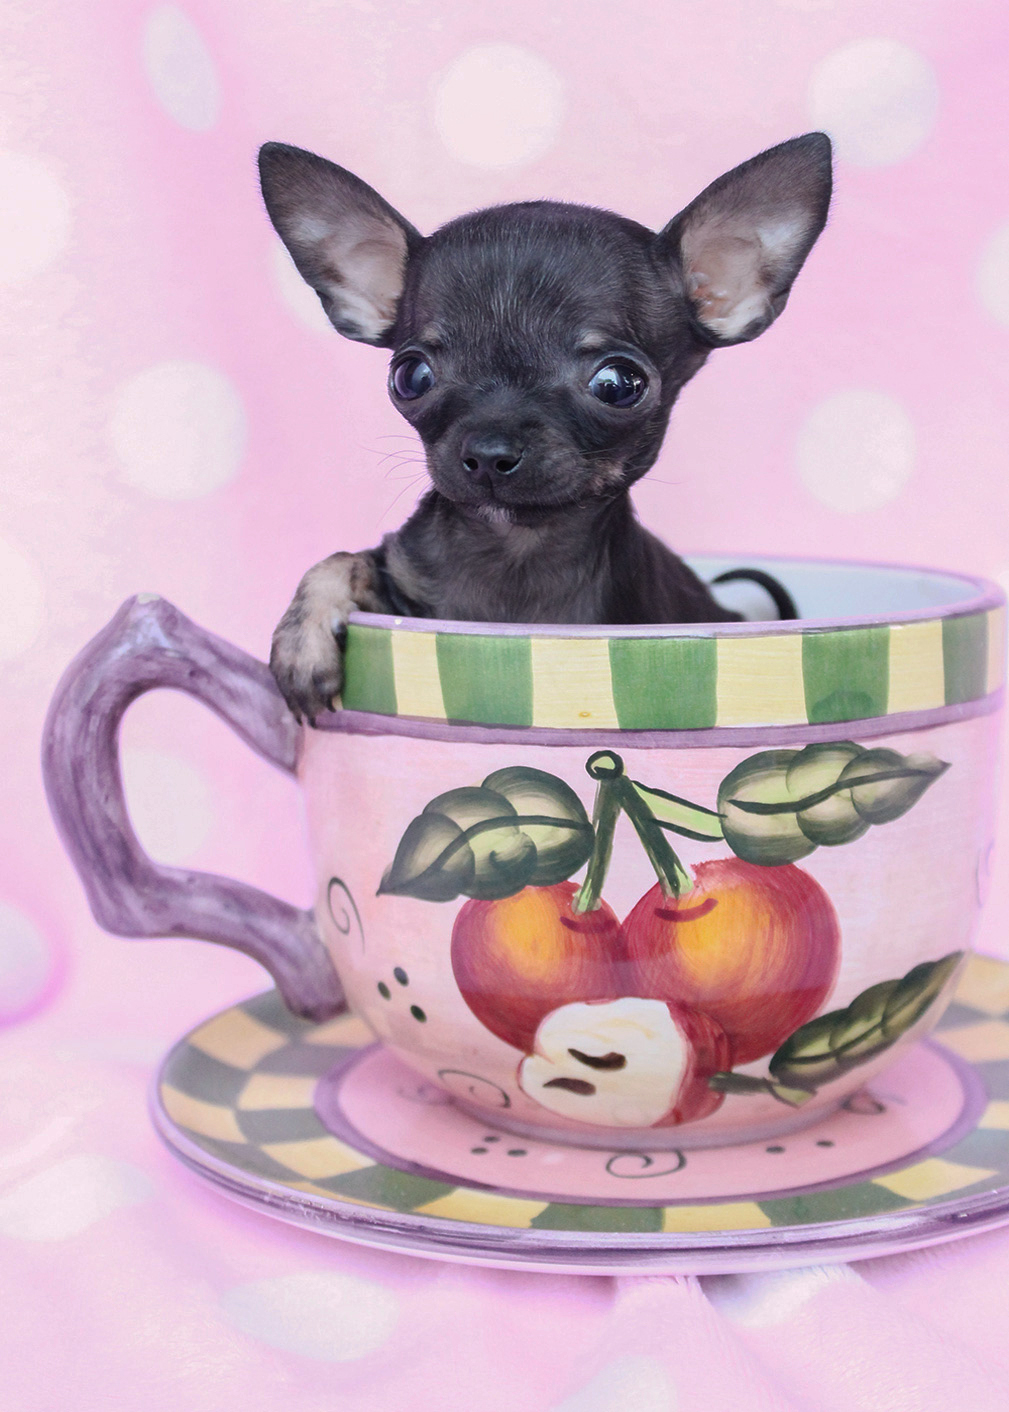 Micro Teacup Chihuahua Puppies For Sale In Florida Cenfesse